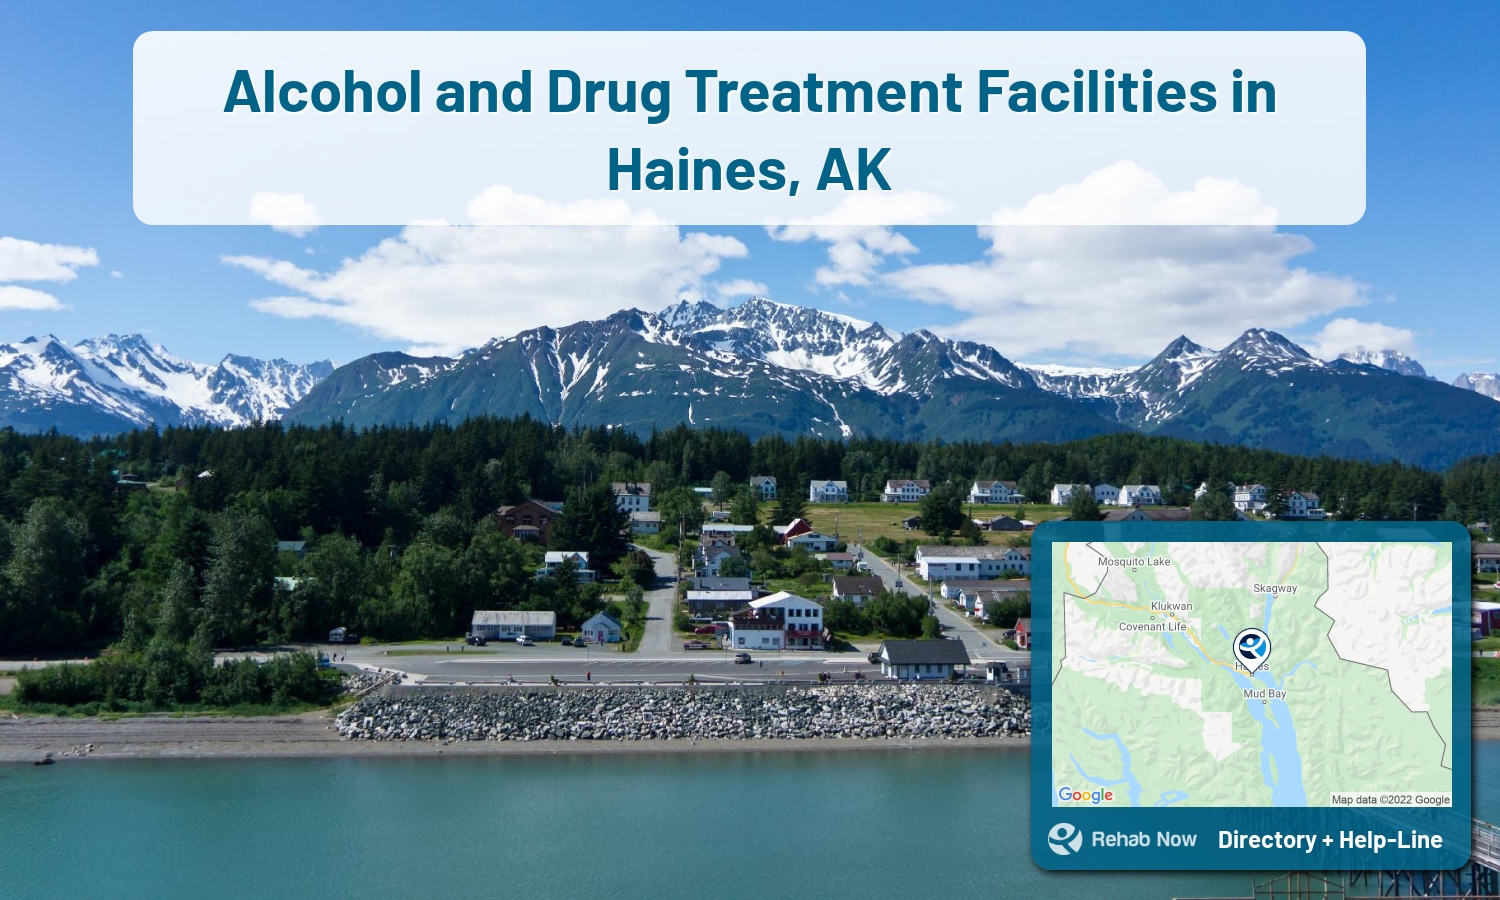 Haines, Alaska Treatment Centers. Find and research drug rehab centers, detox facilities, and treatment programs. Get the right help now!